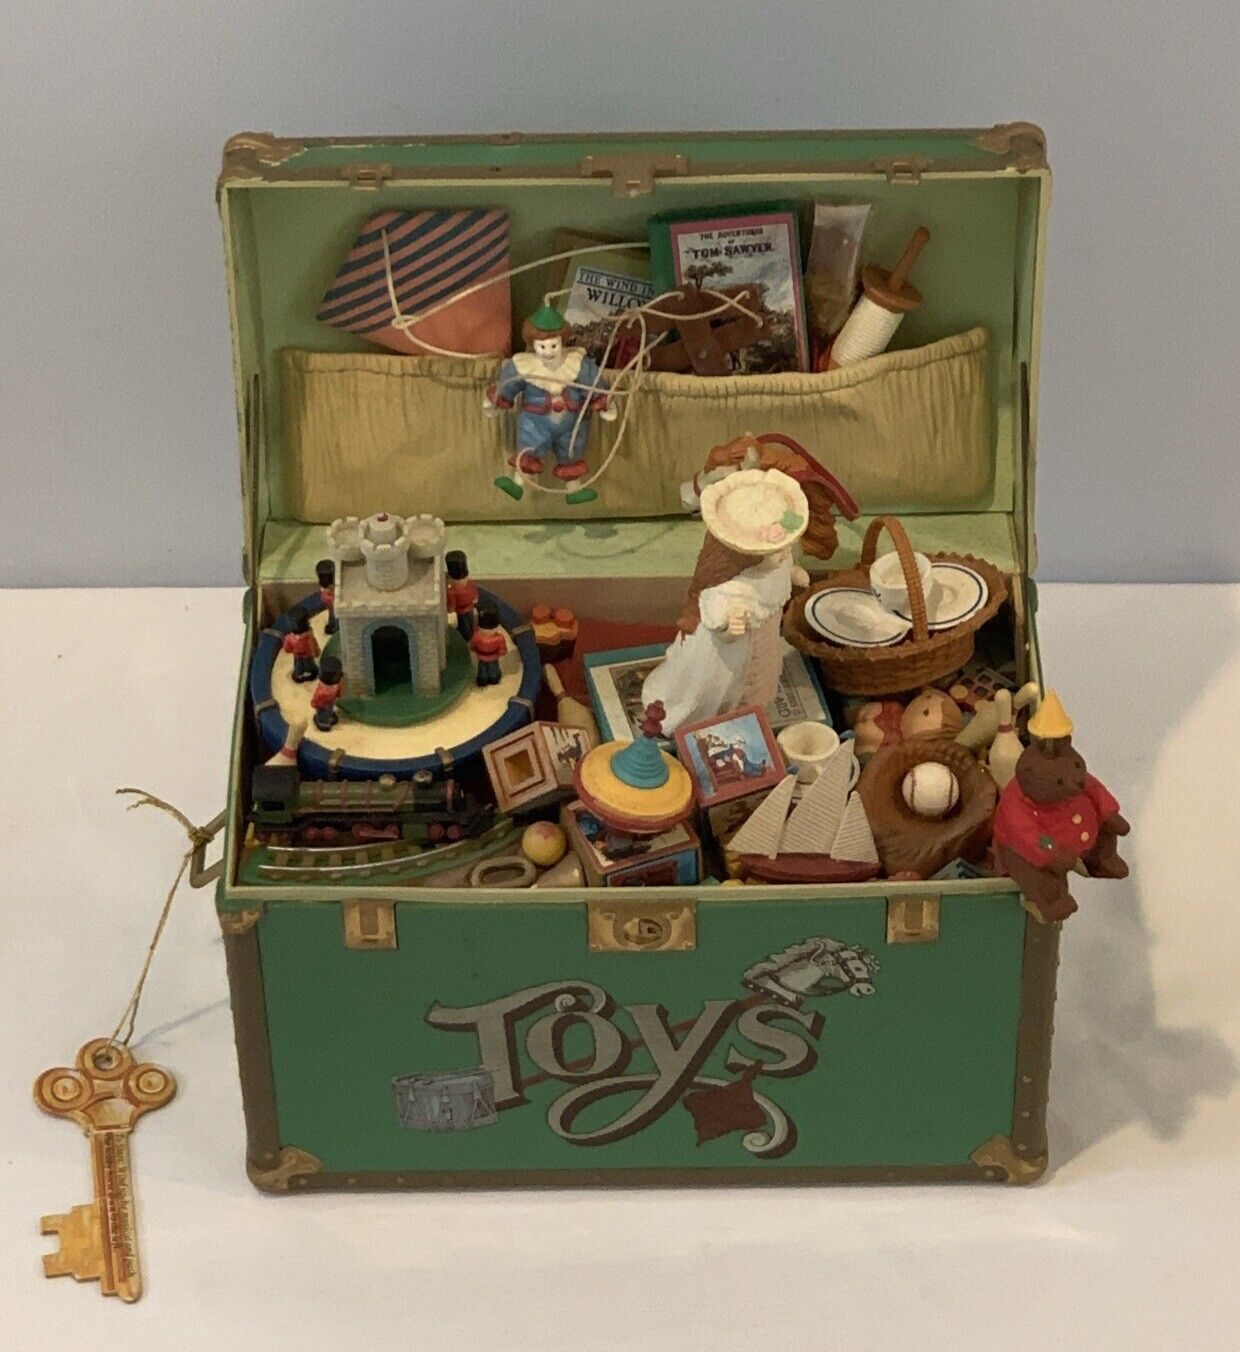 Vintage Enesco 1986 Wind Up Music Box Plays Toy Symphony Treasure Chest Of Toys